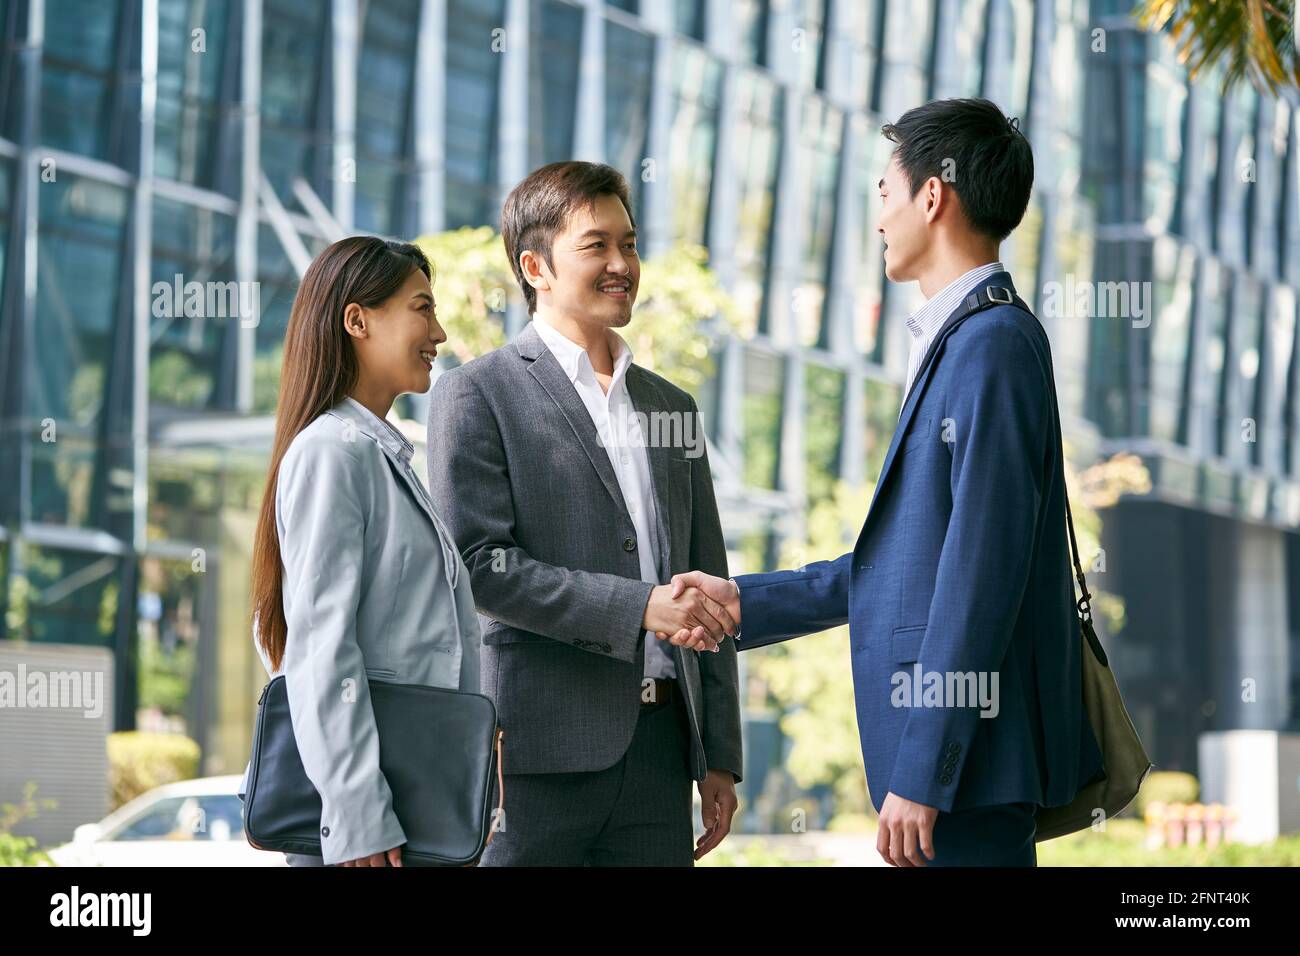 asian business associates meeting in the street in downtown financial district shaking hands Stock Photo